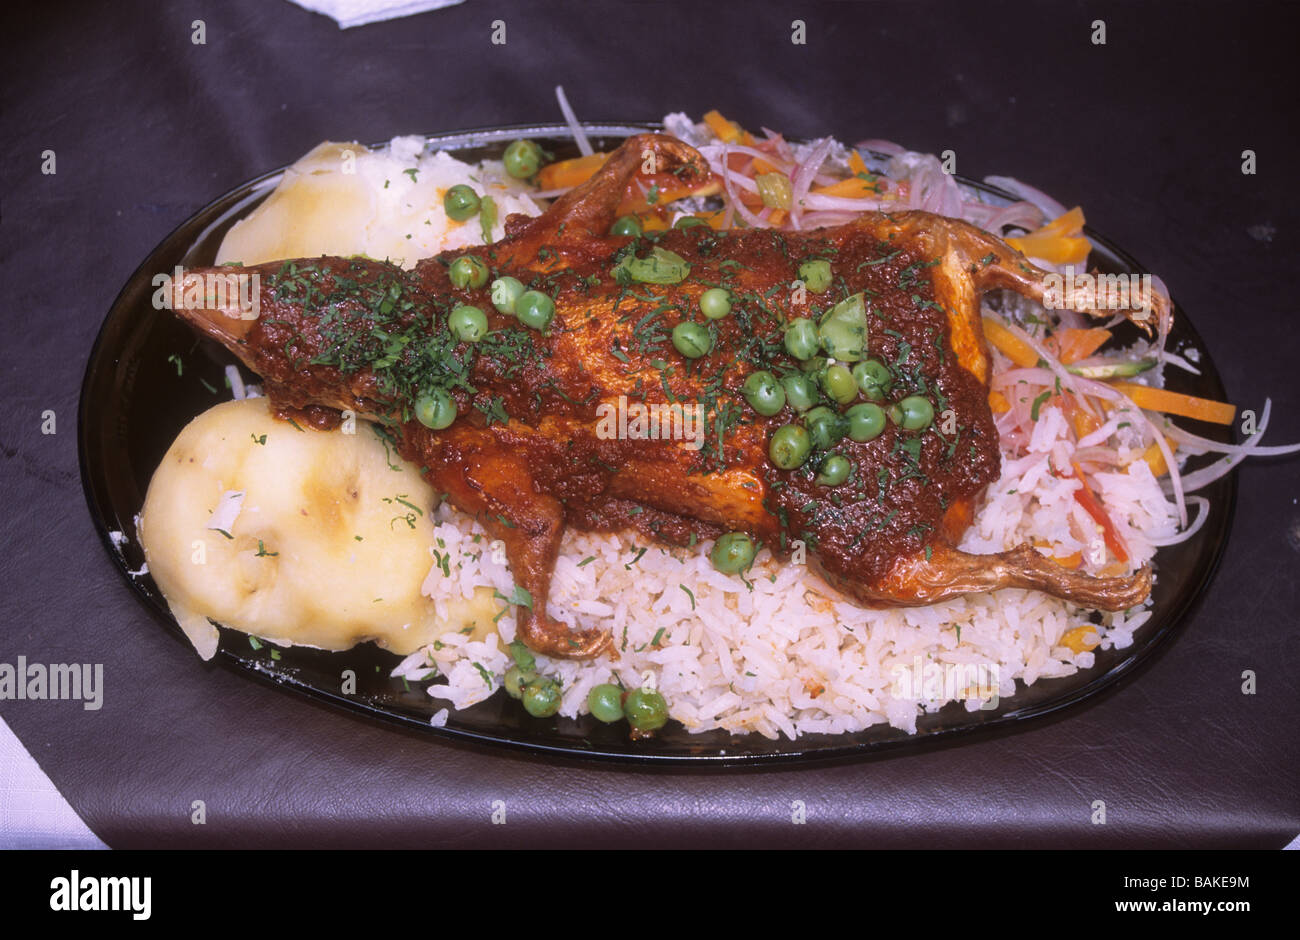 Cuy or guinea pig, a popular dish in Peru and also Ecuador and Quechua speaking parts of Bolivia. Here served with rice, potatoes and salad. Stock Photo